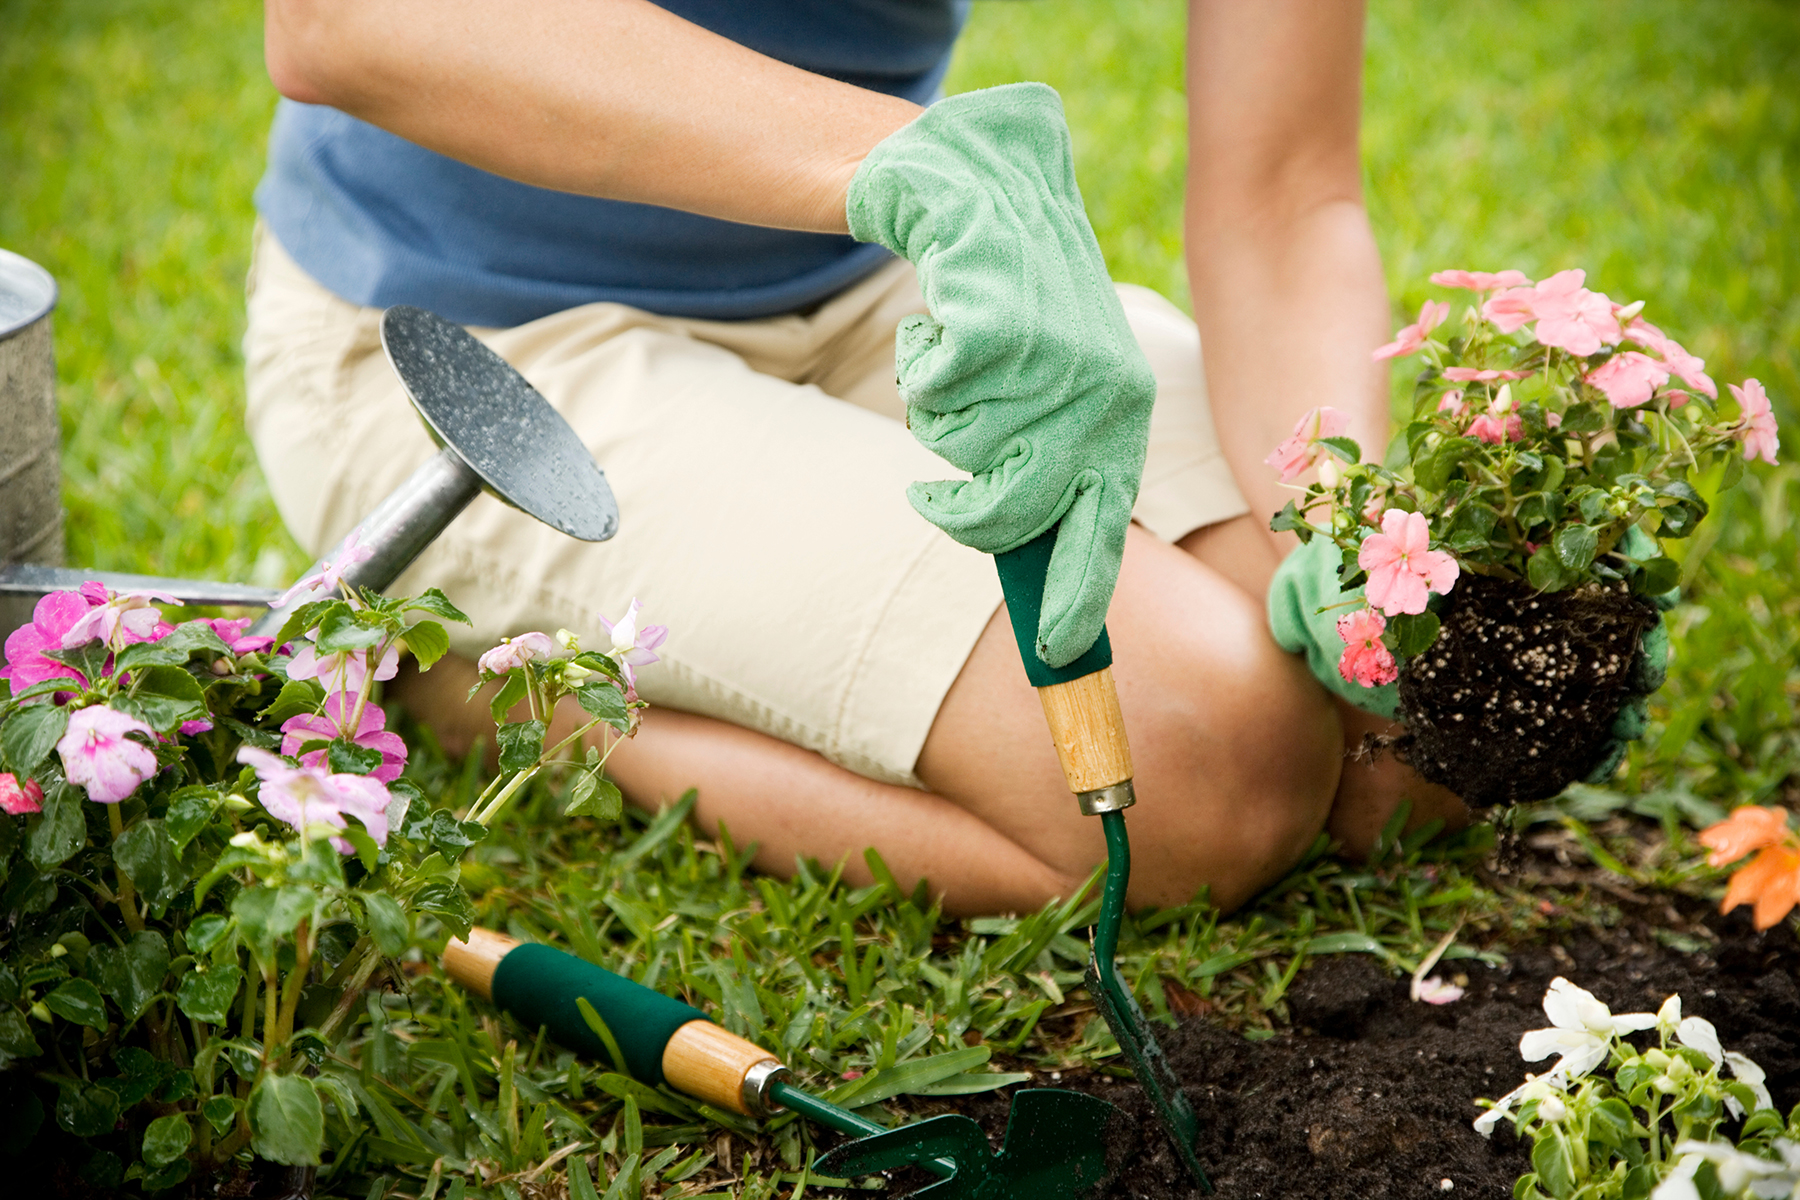 Gardening Tips For All Year Round!